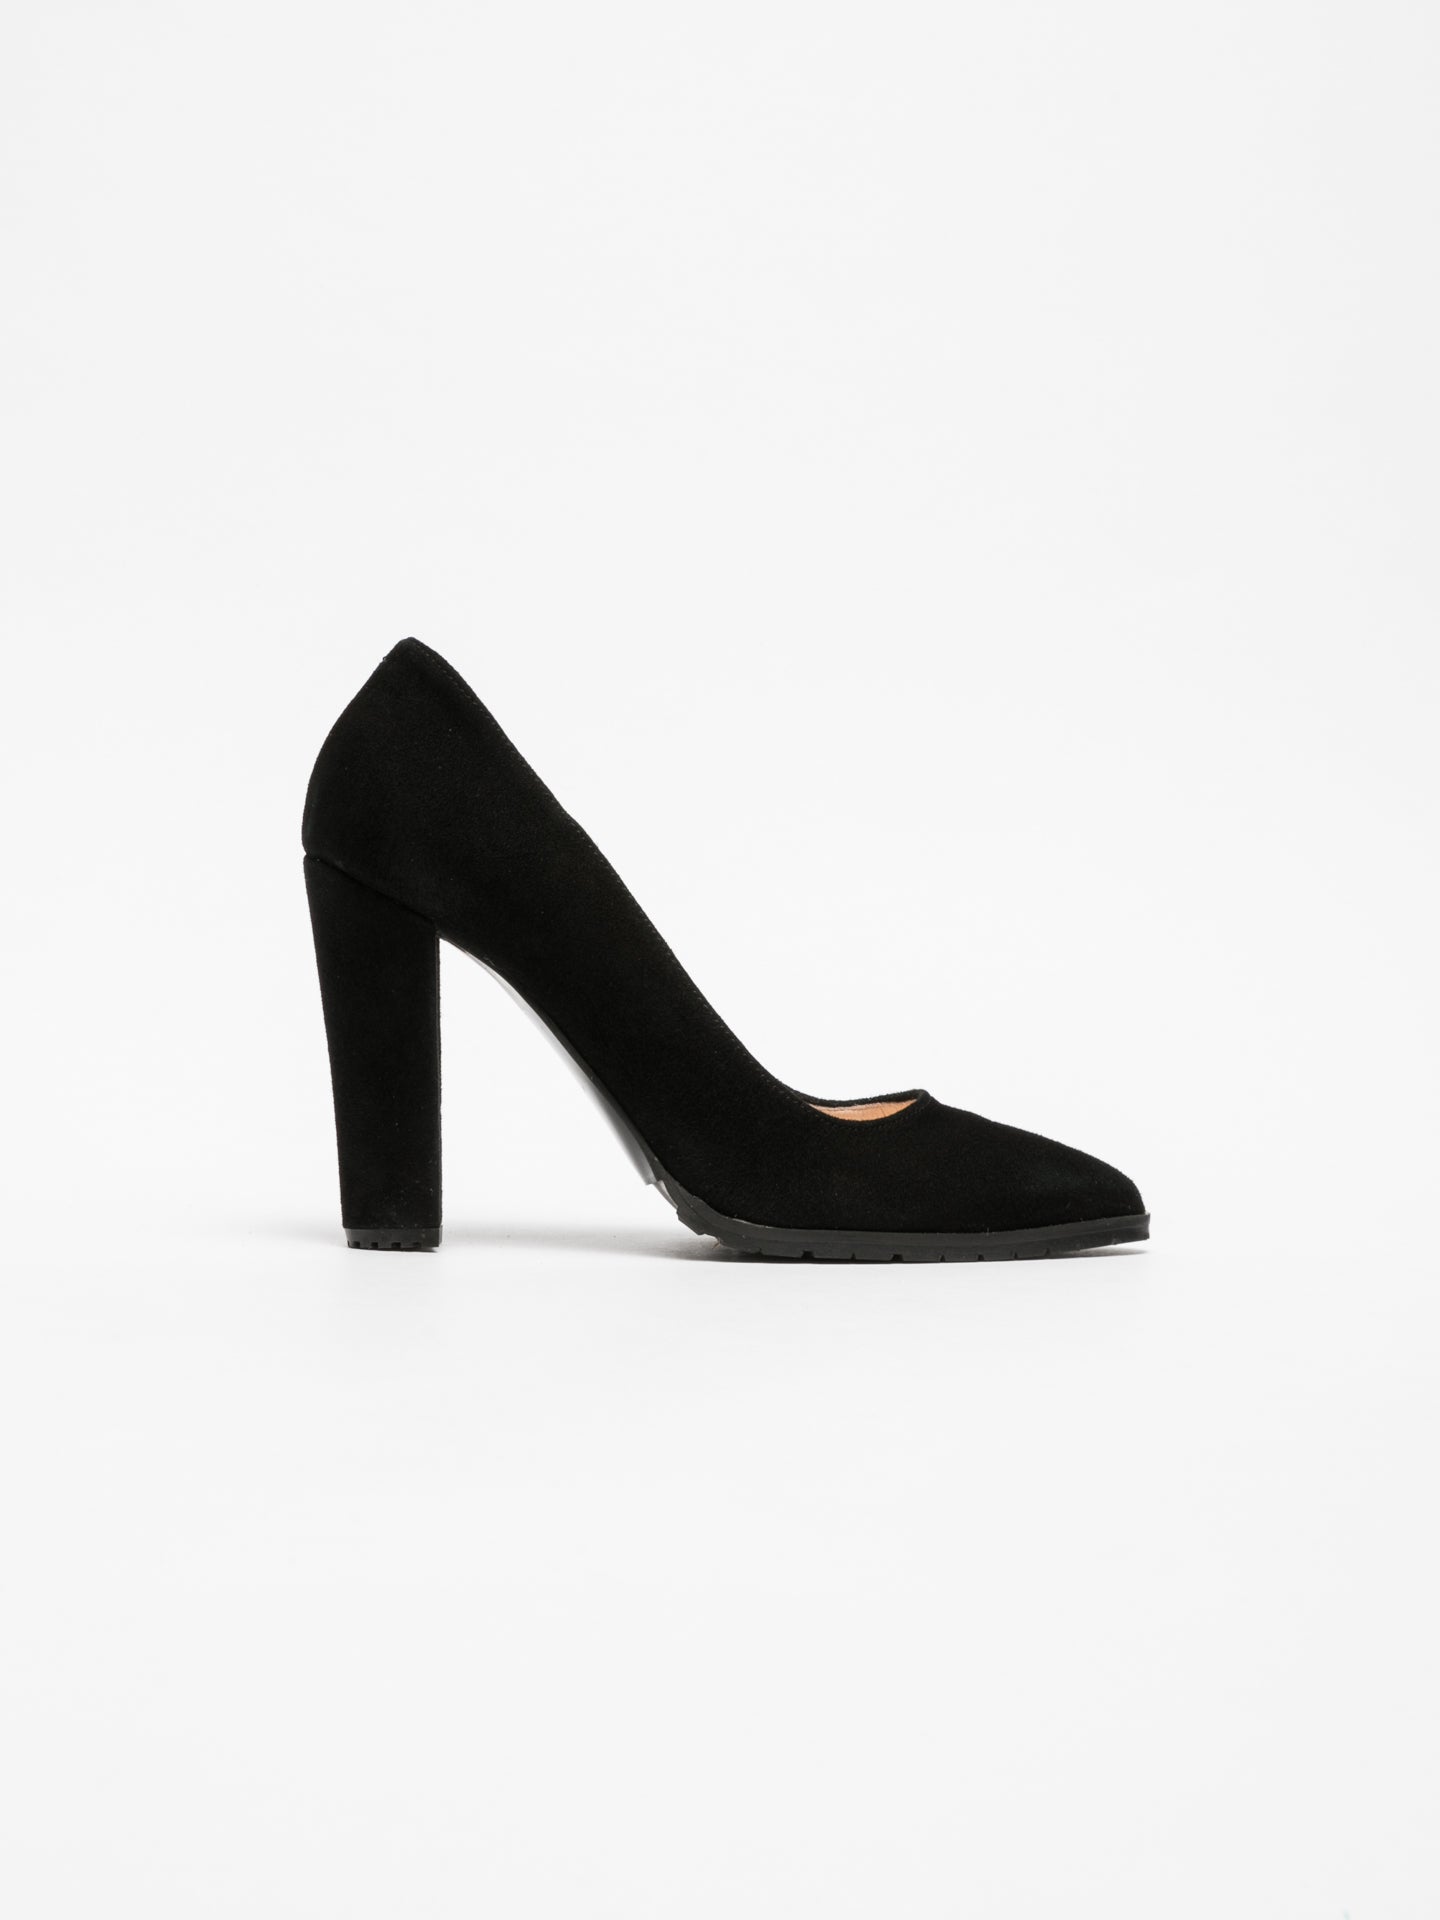 Foreva Black Pointed Toe Shoes